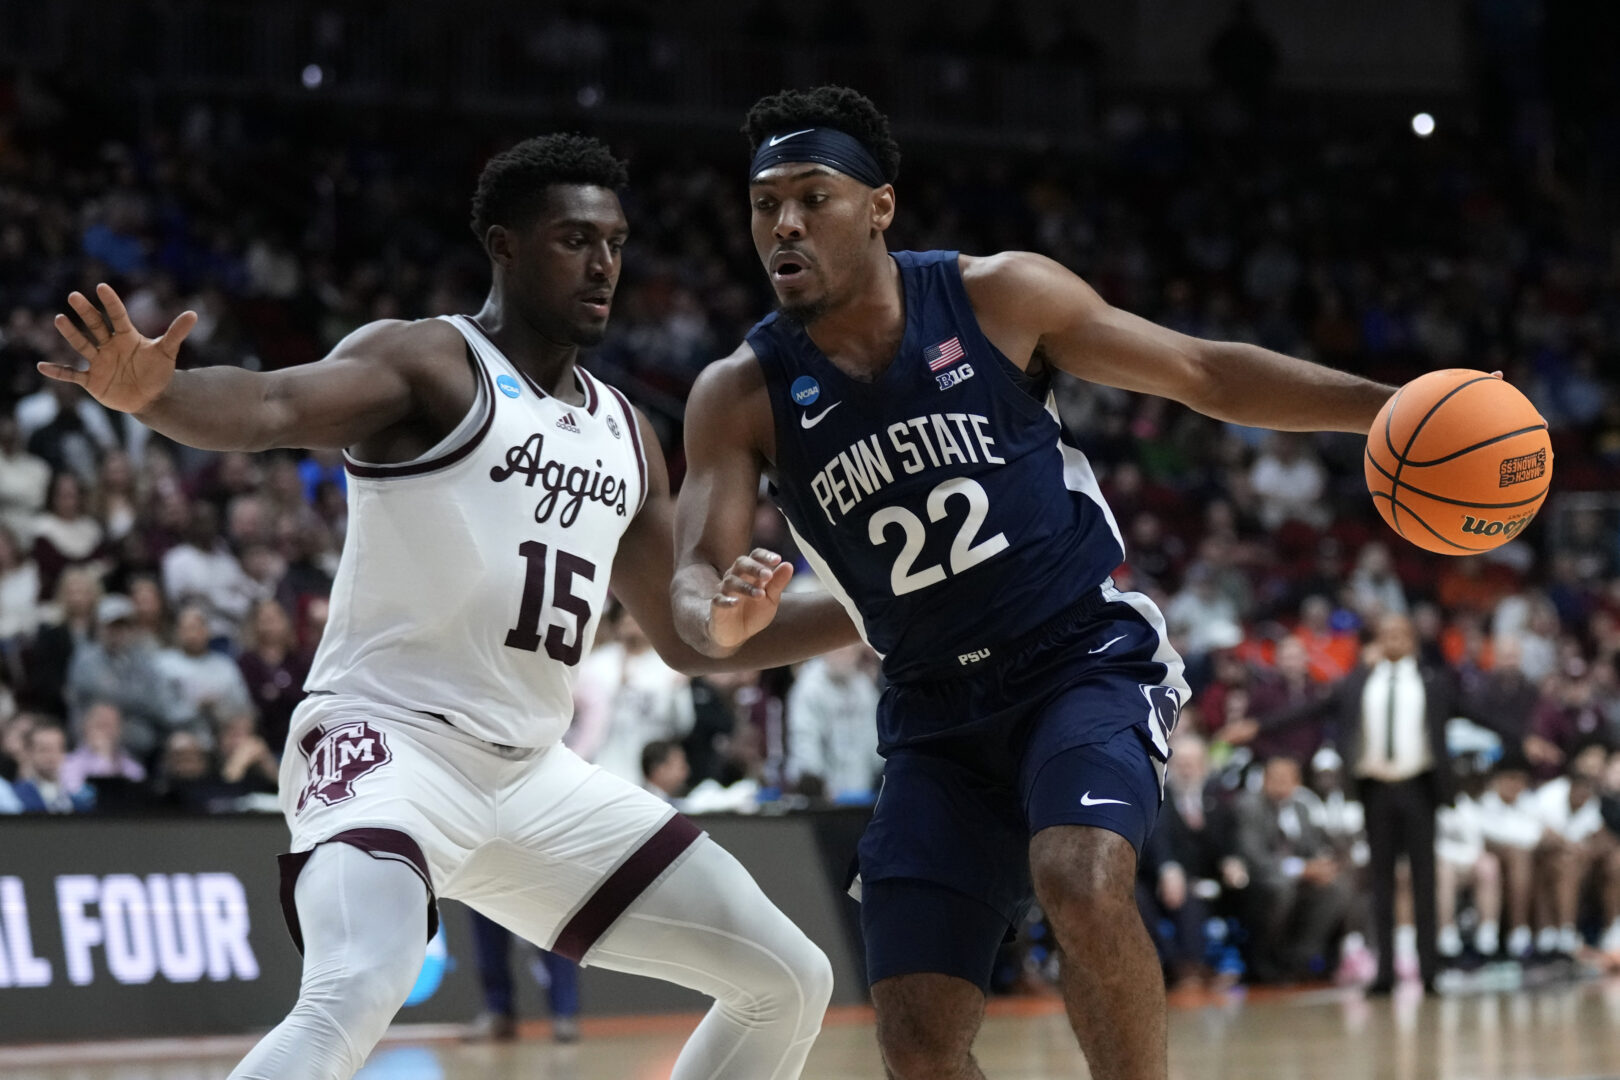 Penn State guard Jalen Pickett (22) drives past Texas A&M forward Henry Coleman III (15) in the second half of a first-round college basketball game in the NCAA Tournament, Thursday, March 16, 2023, in Des Moines, Iowa. (AP Photo/Charlie Neibergall)